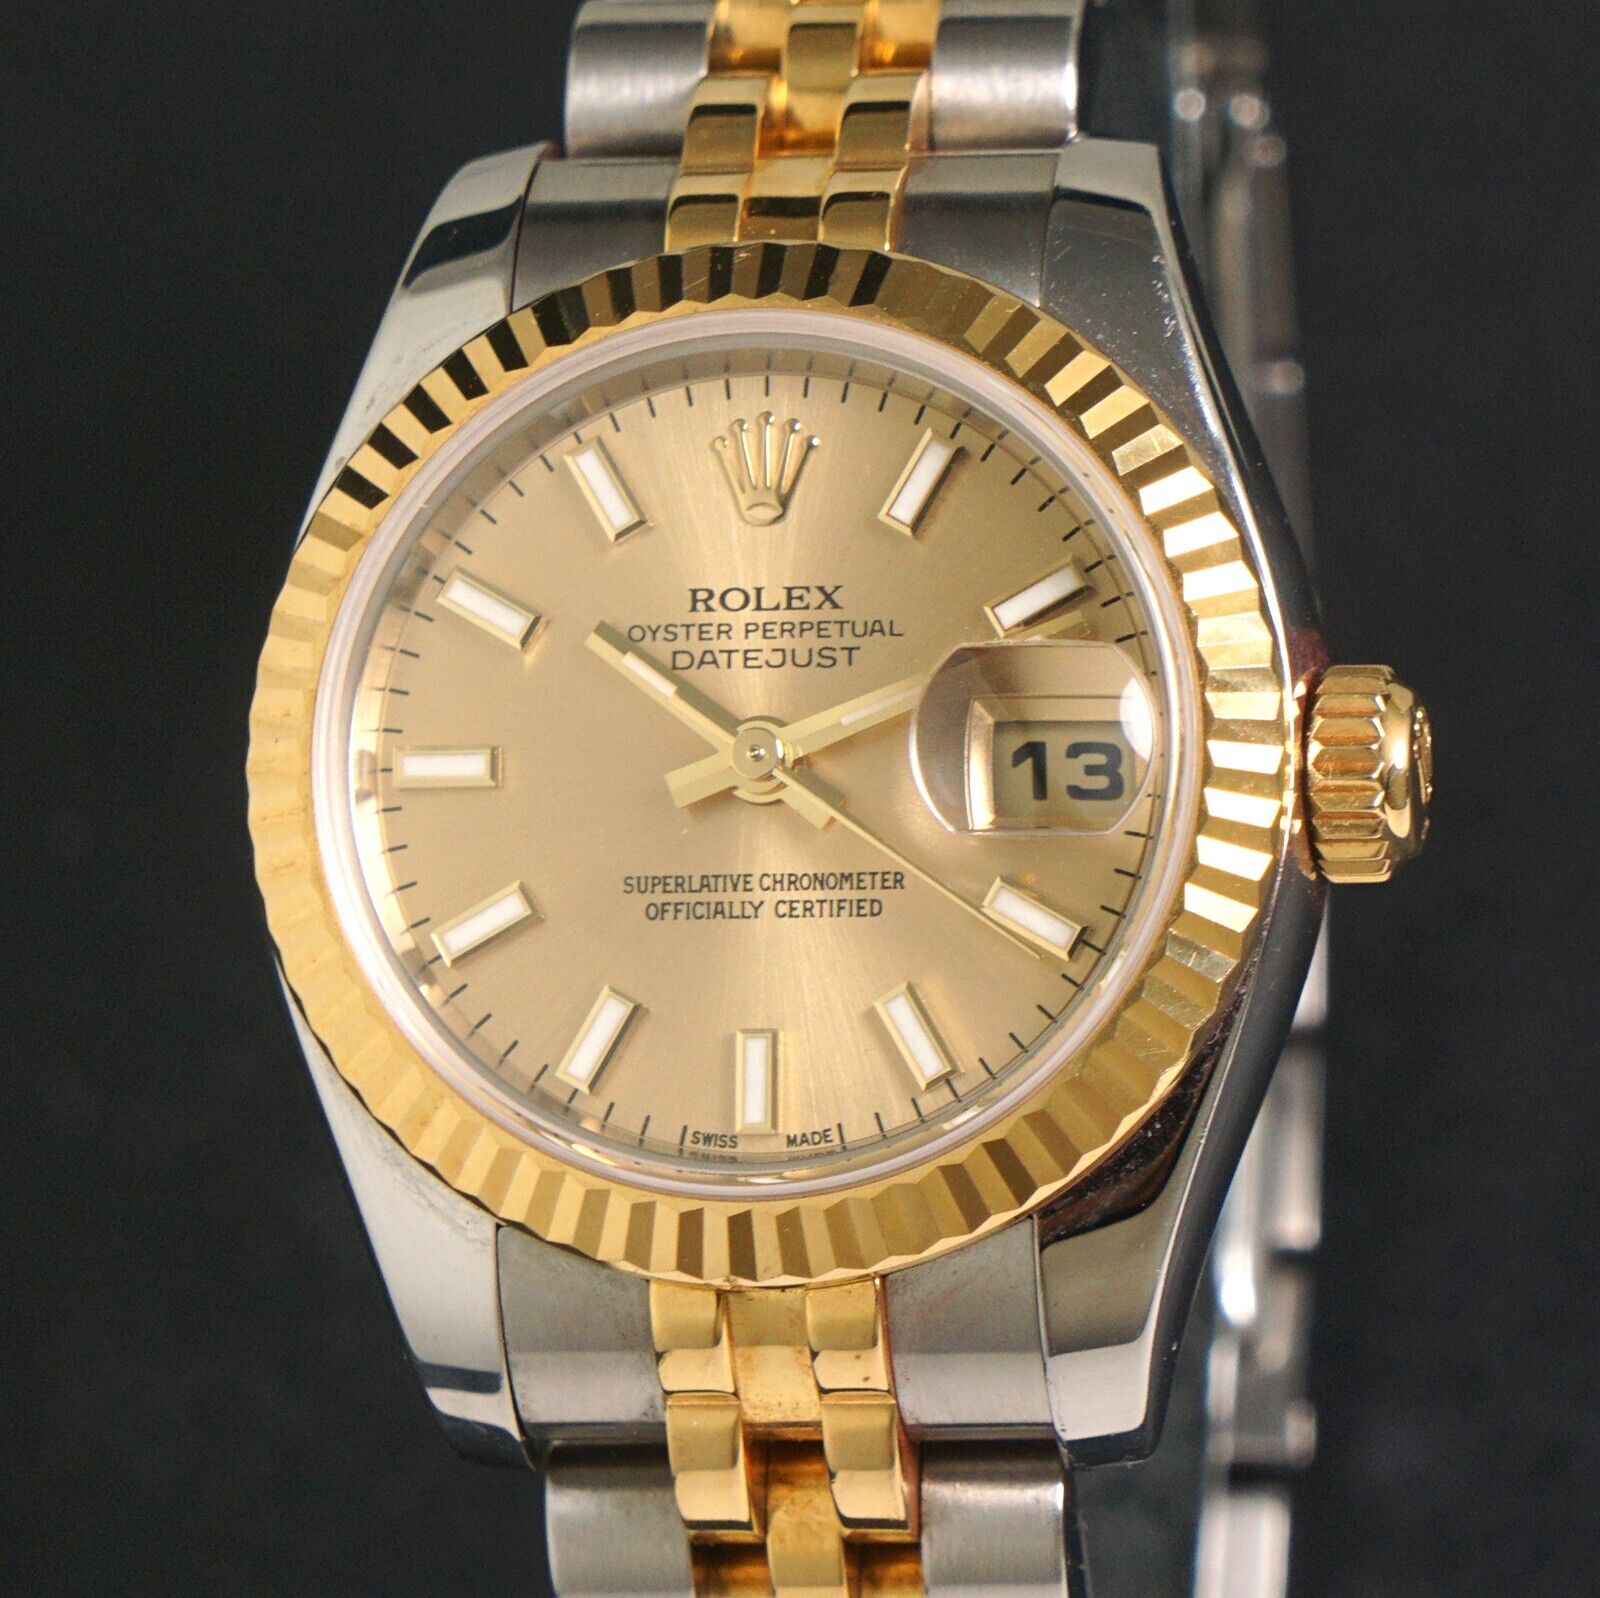 Estate Originals Stainless Steel and 18K Yellow Gold ROLEX OYSTER PERPETUAL  DATEJUST SUPERLATIVE CHRONOMETER Swiss Made Wristwatch